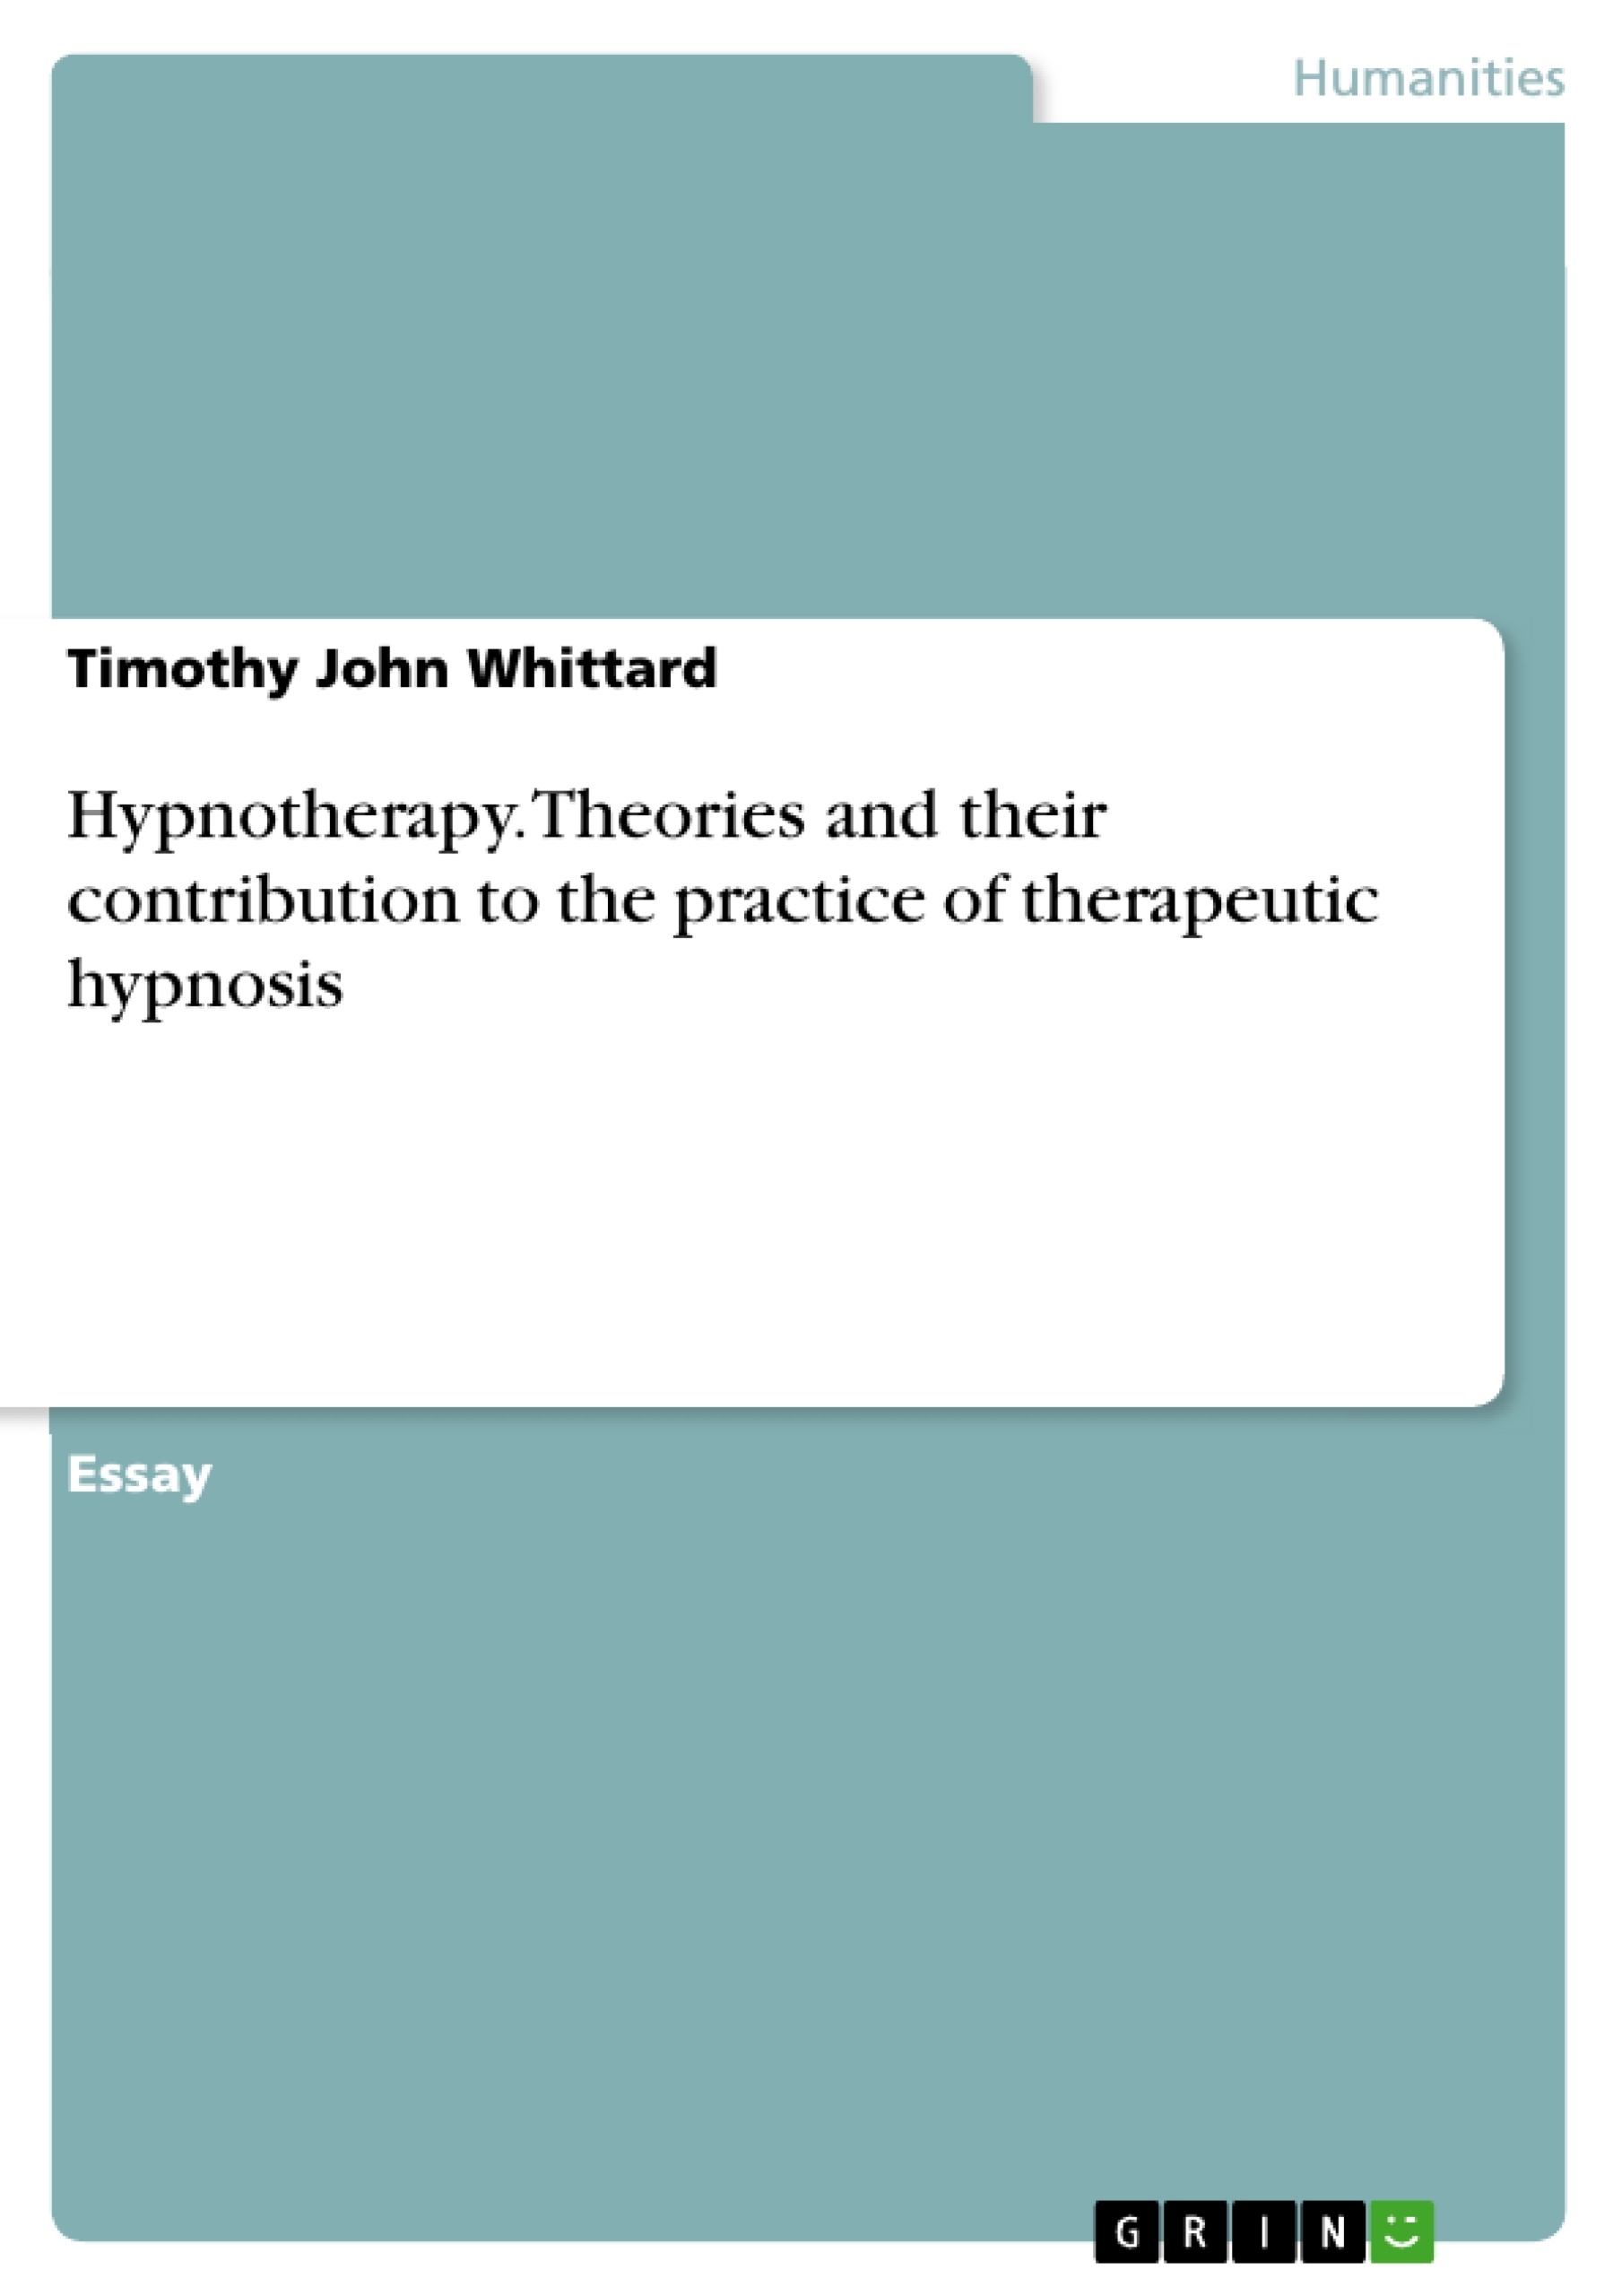 Titel: Hypnotherapy. Theories and their contribution to the practice of therapeutic hypnosis